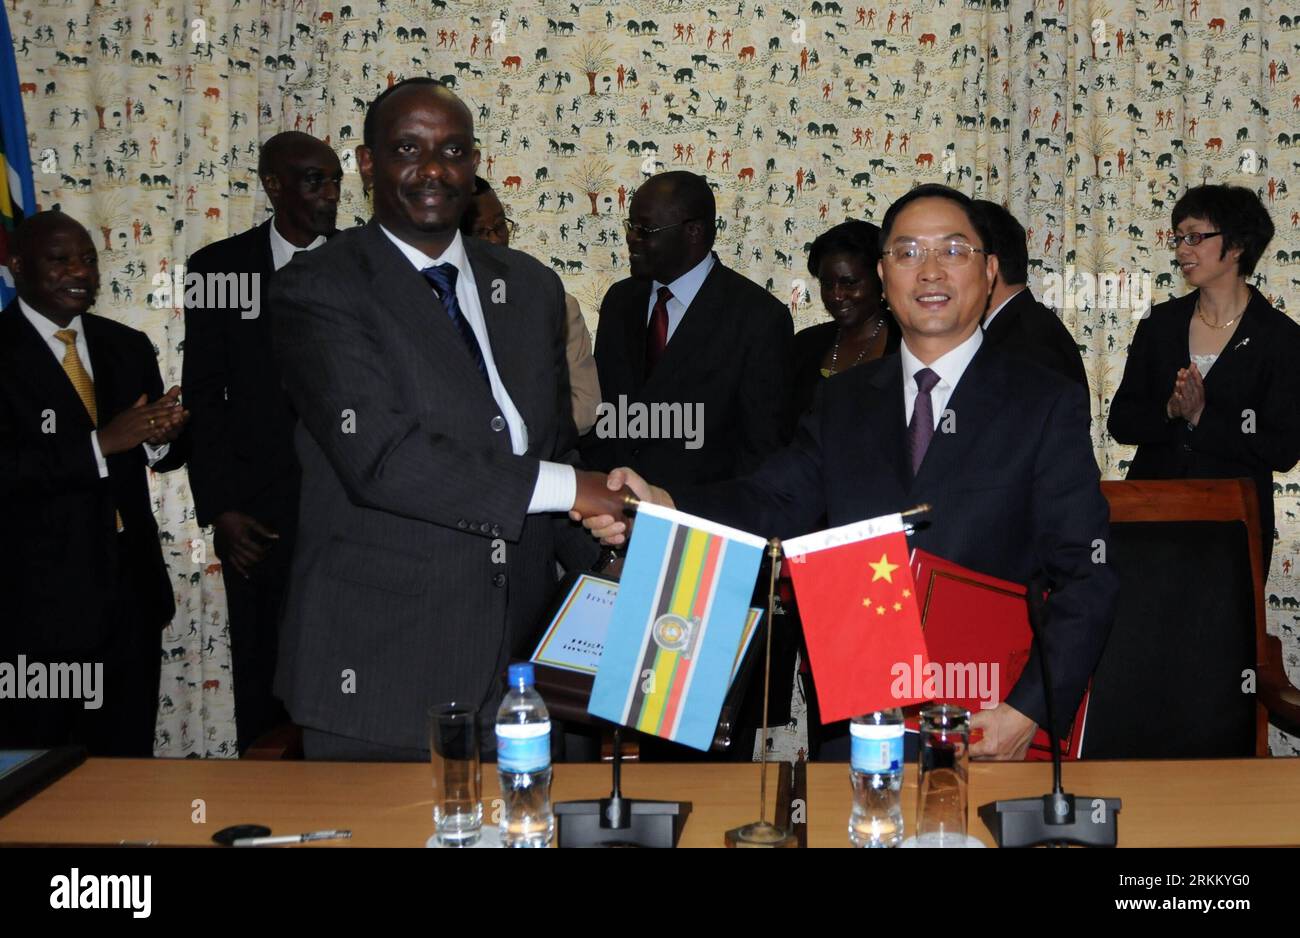 Bildnummer: 56290781  Datum: 17.11.2011  Copyright: imago/Xinhua (111117) -- ARUSHA (TANZANIA), Nov. 17, 2011 (Xinhua) -- Jiang Yaoping (R, front), Chinese vice minister of Commerce, shakes hands with Richard Sezibera, Secretary General of the East African Community (EAC), after signing a Framework Agreement on Economic and Trade Cooperation at EAC headquarters in Arusha, Tanzania, on Nov.17, 2011. The agreement, first of its kind in sub-Sahara region, is aimed to further promote the economic and trade relations between China and EAC. (Xinhua/Chen Jing) TANZANIA-ARUSHA-CHINA-EAC-COOPERATION PU Stock Photo